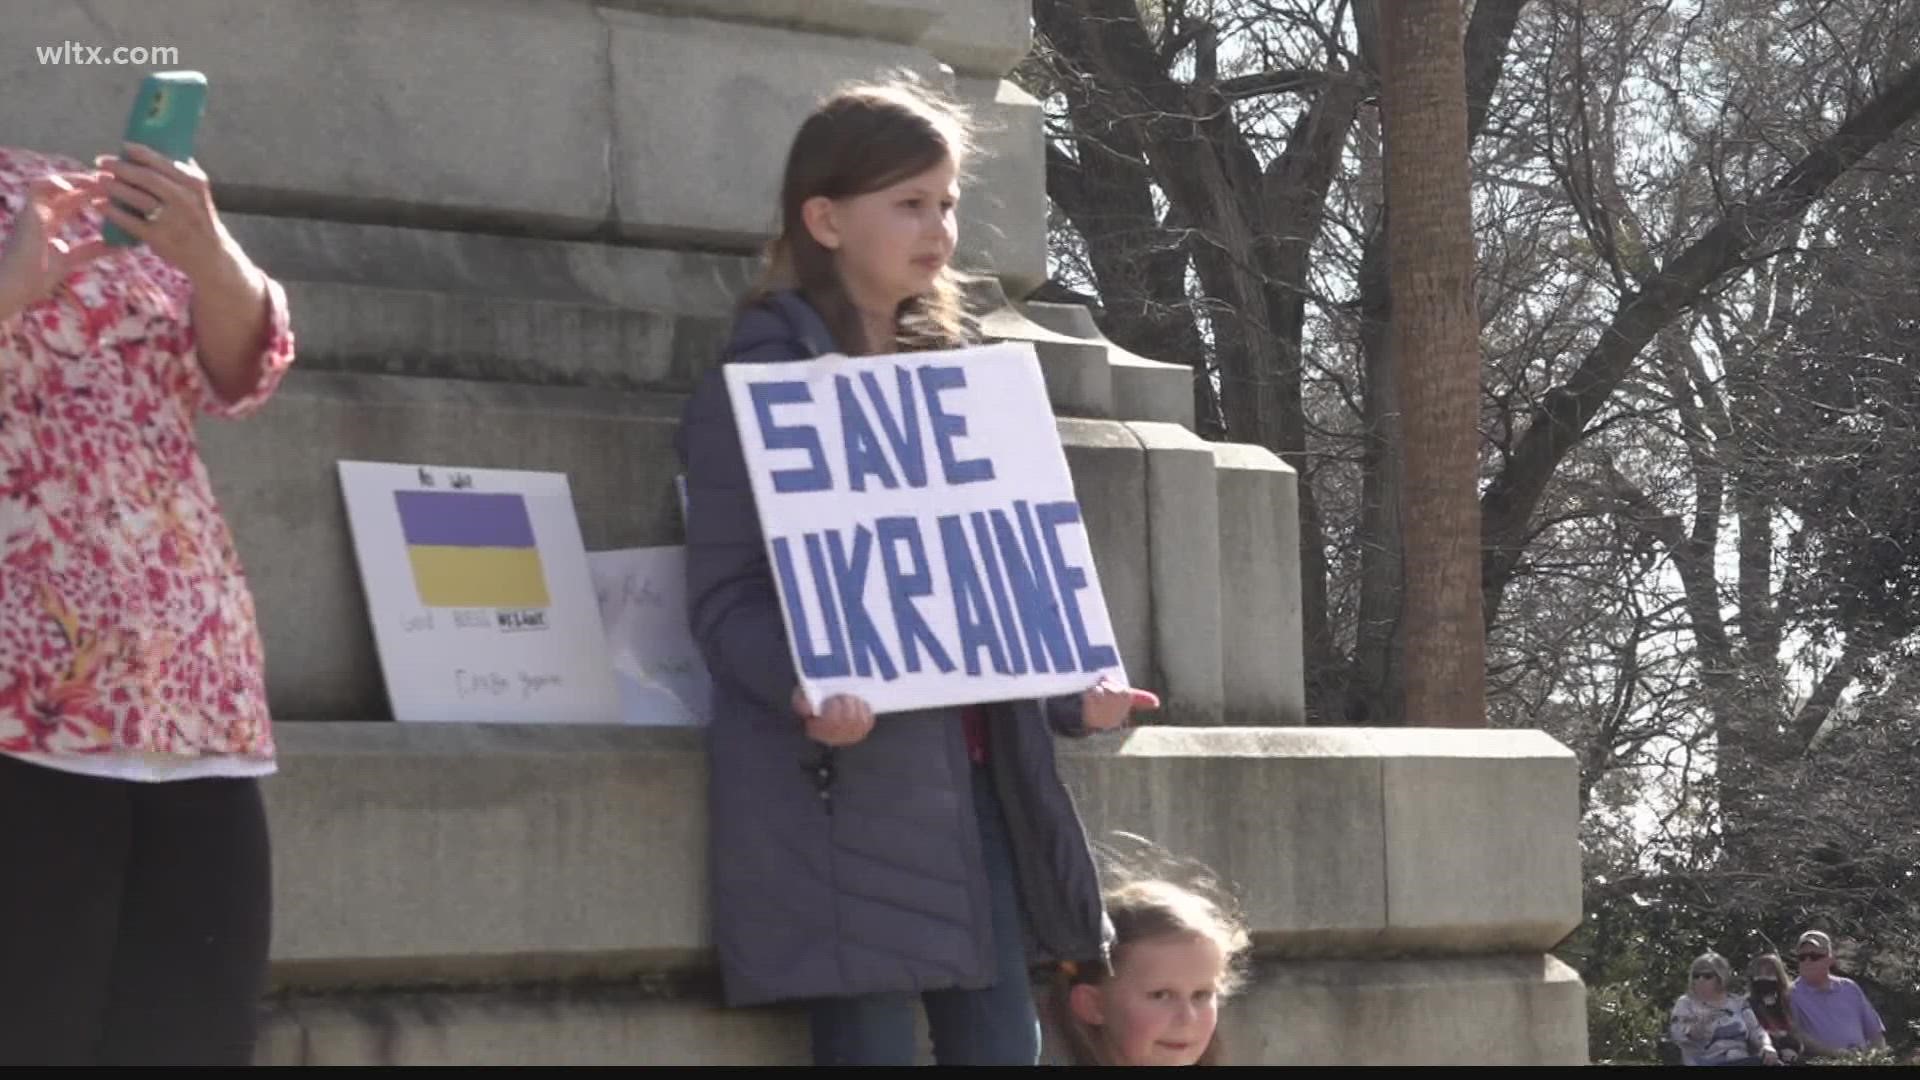 Dozens of people filled the State House grounds in support of Ukraine while hoping to spread a message to 'Stop War'